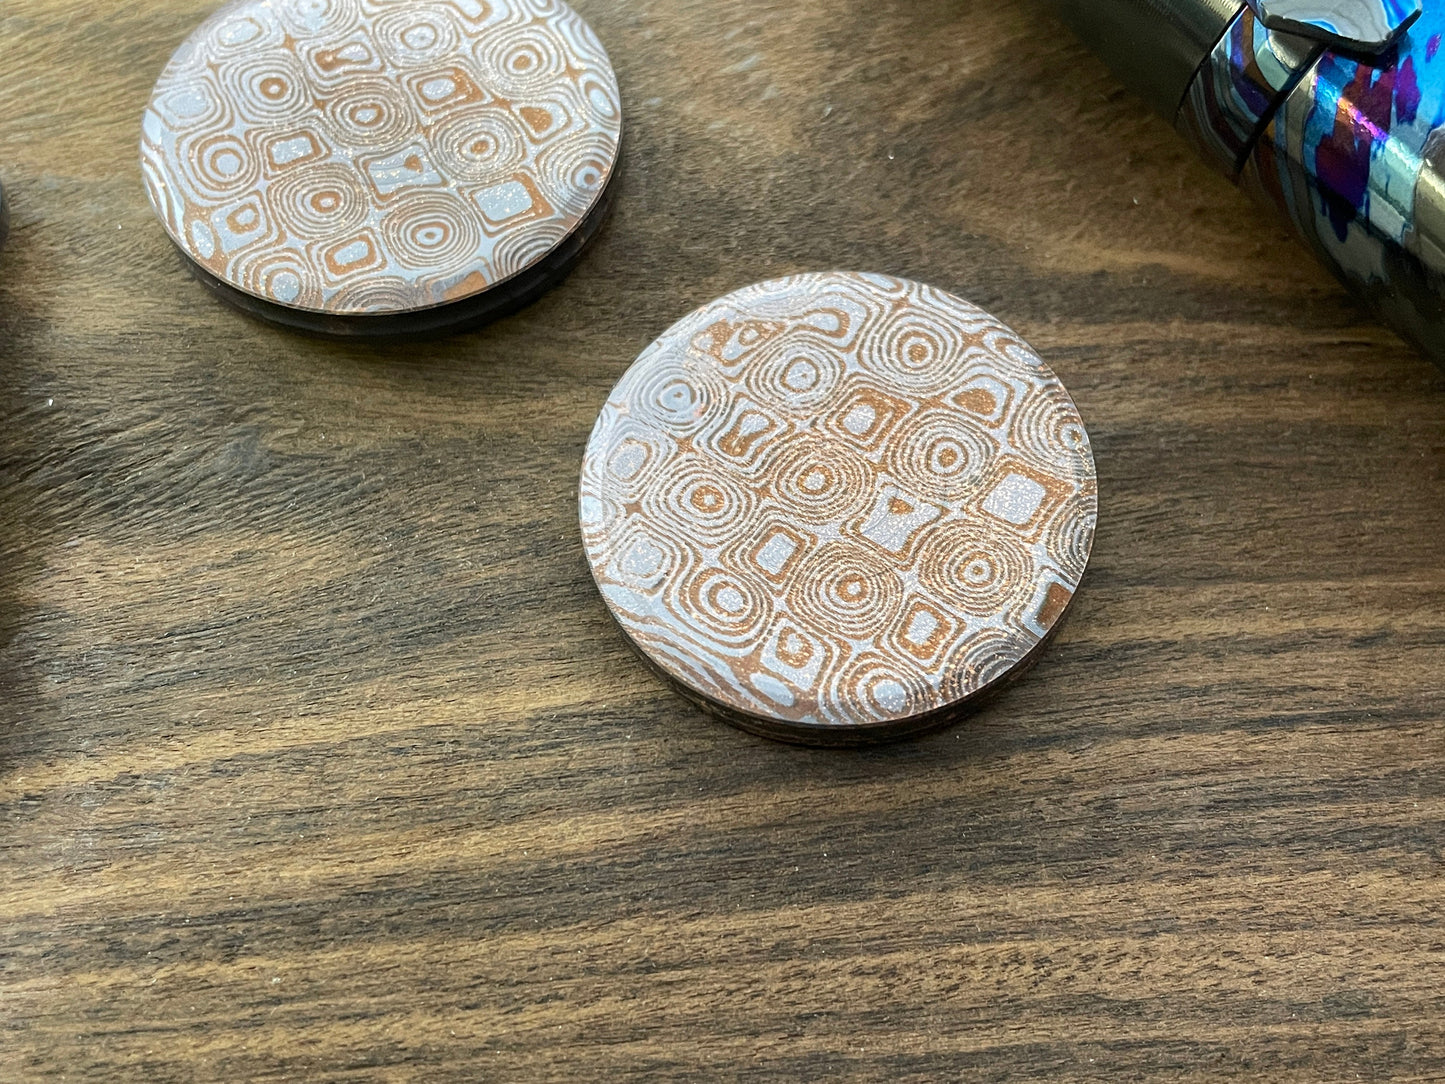 HAPTIC Coins CLICKY Damasteel pattern ROSES Copper Fidget